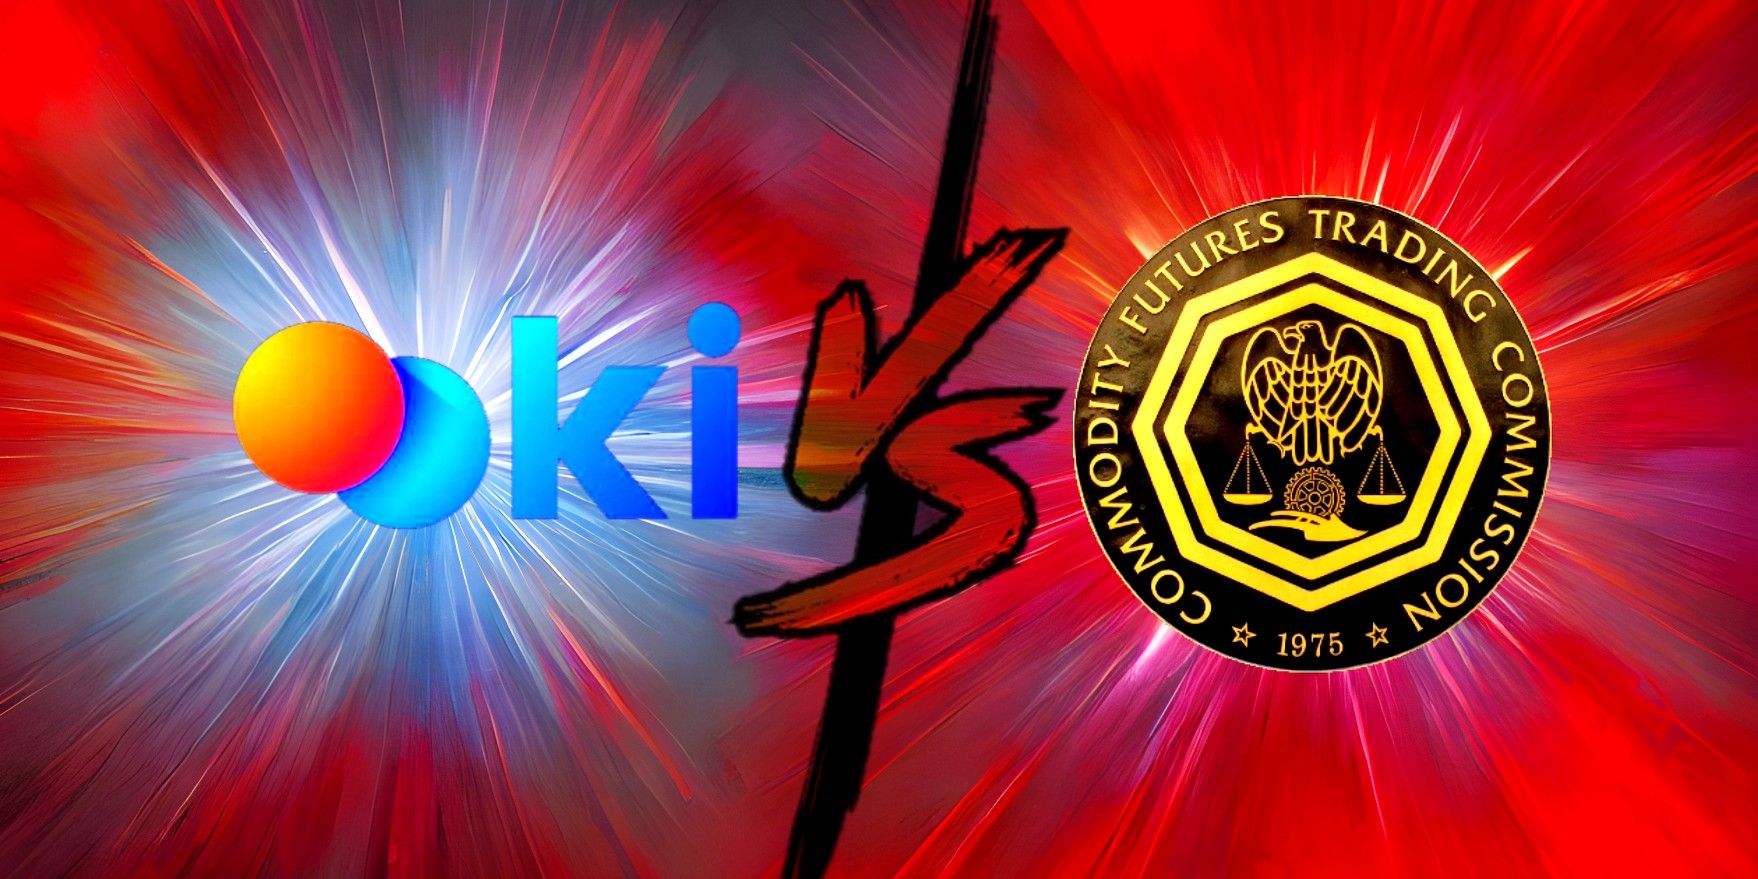 Ooki logo on left, "VS" text with black vertical stripe in center, CFTC logo on right, with red and blue starburst background